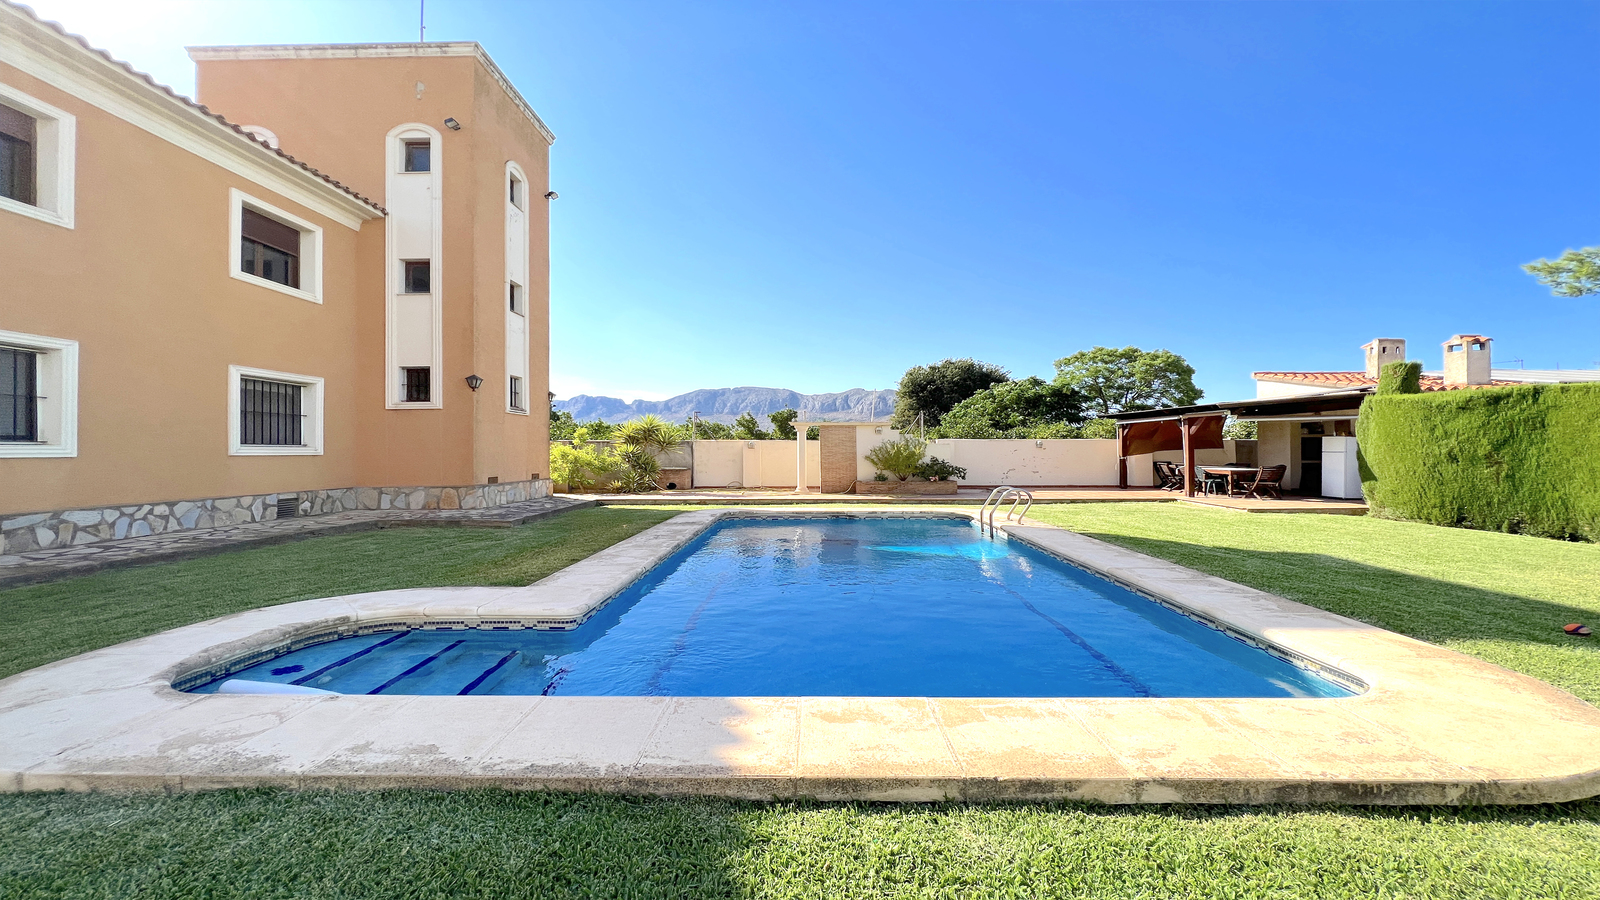 4 bedroom villa with XXL large sun terrace, large pool, BBQ house with a summer kitchen, garden with fruit trees.